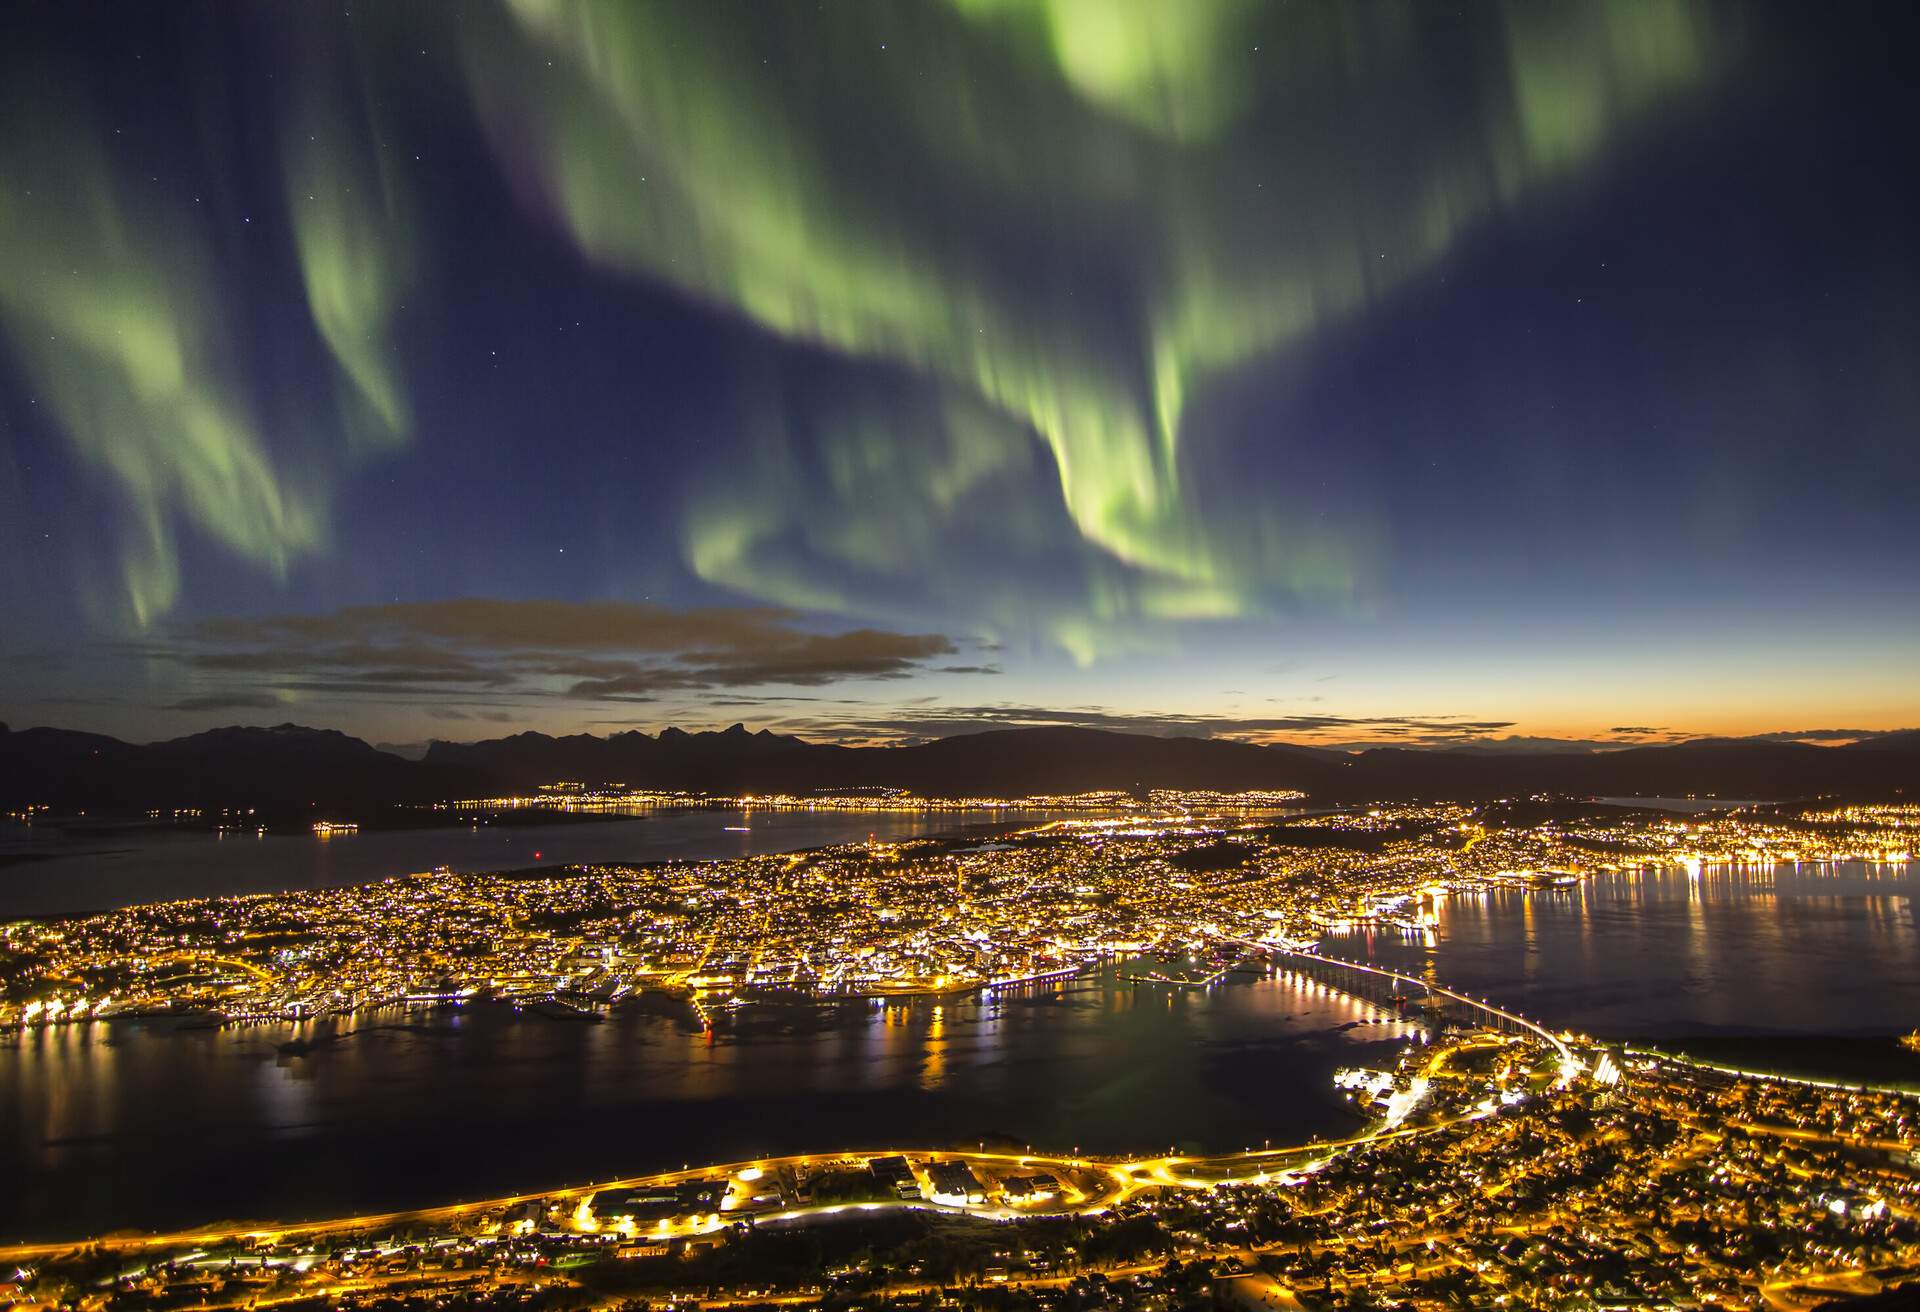 A night-time view of a dazzling coastal city under the green streaks of northern lights.